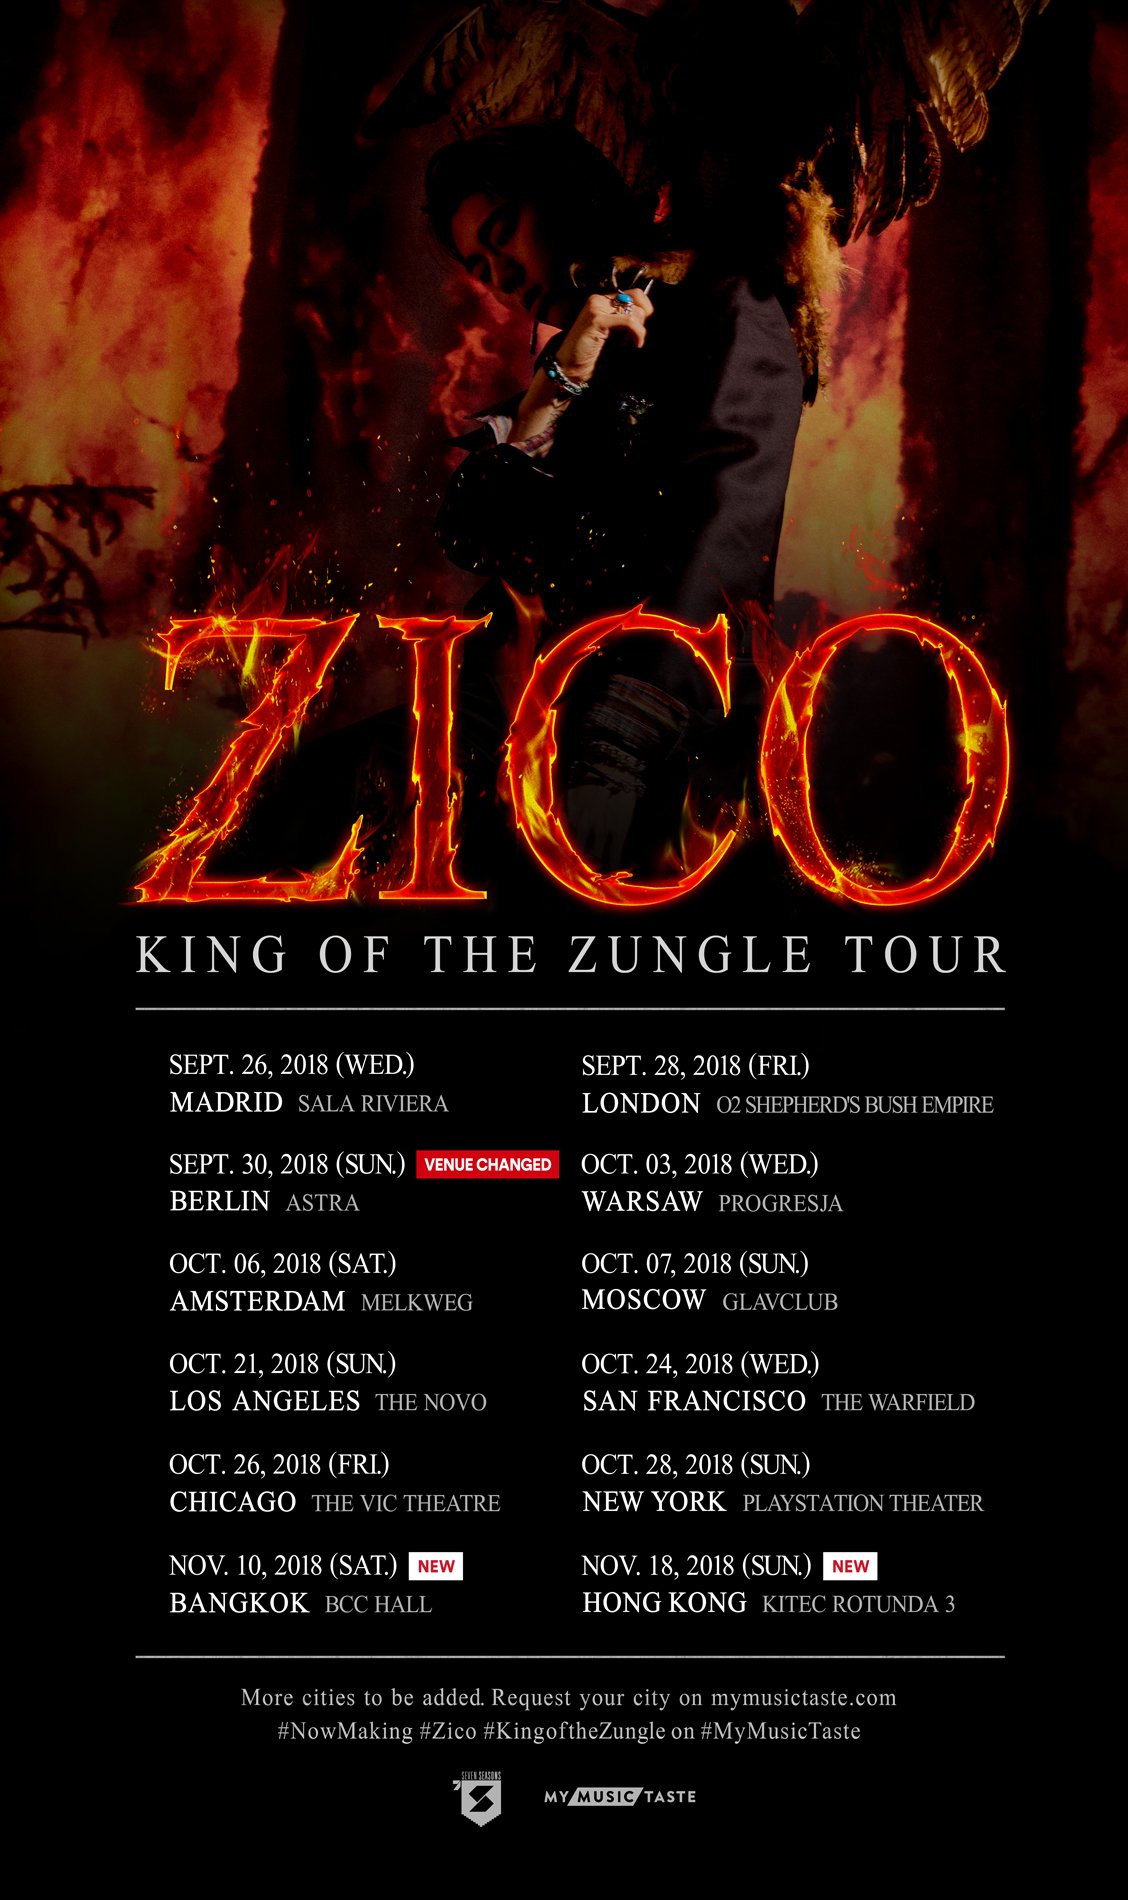 Zico King of the Zungle Tour – WITH MY MUSIC TASTE